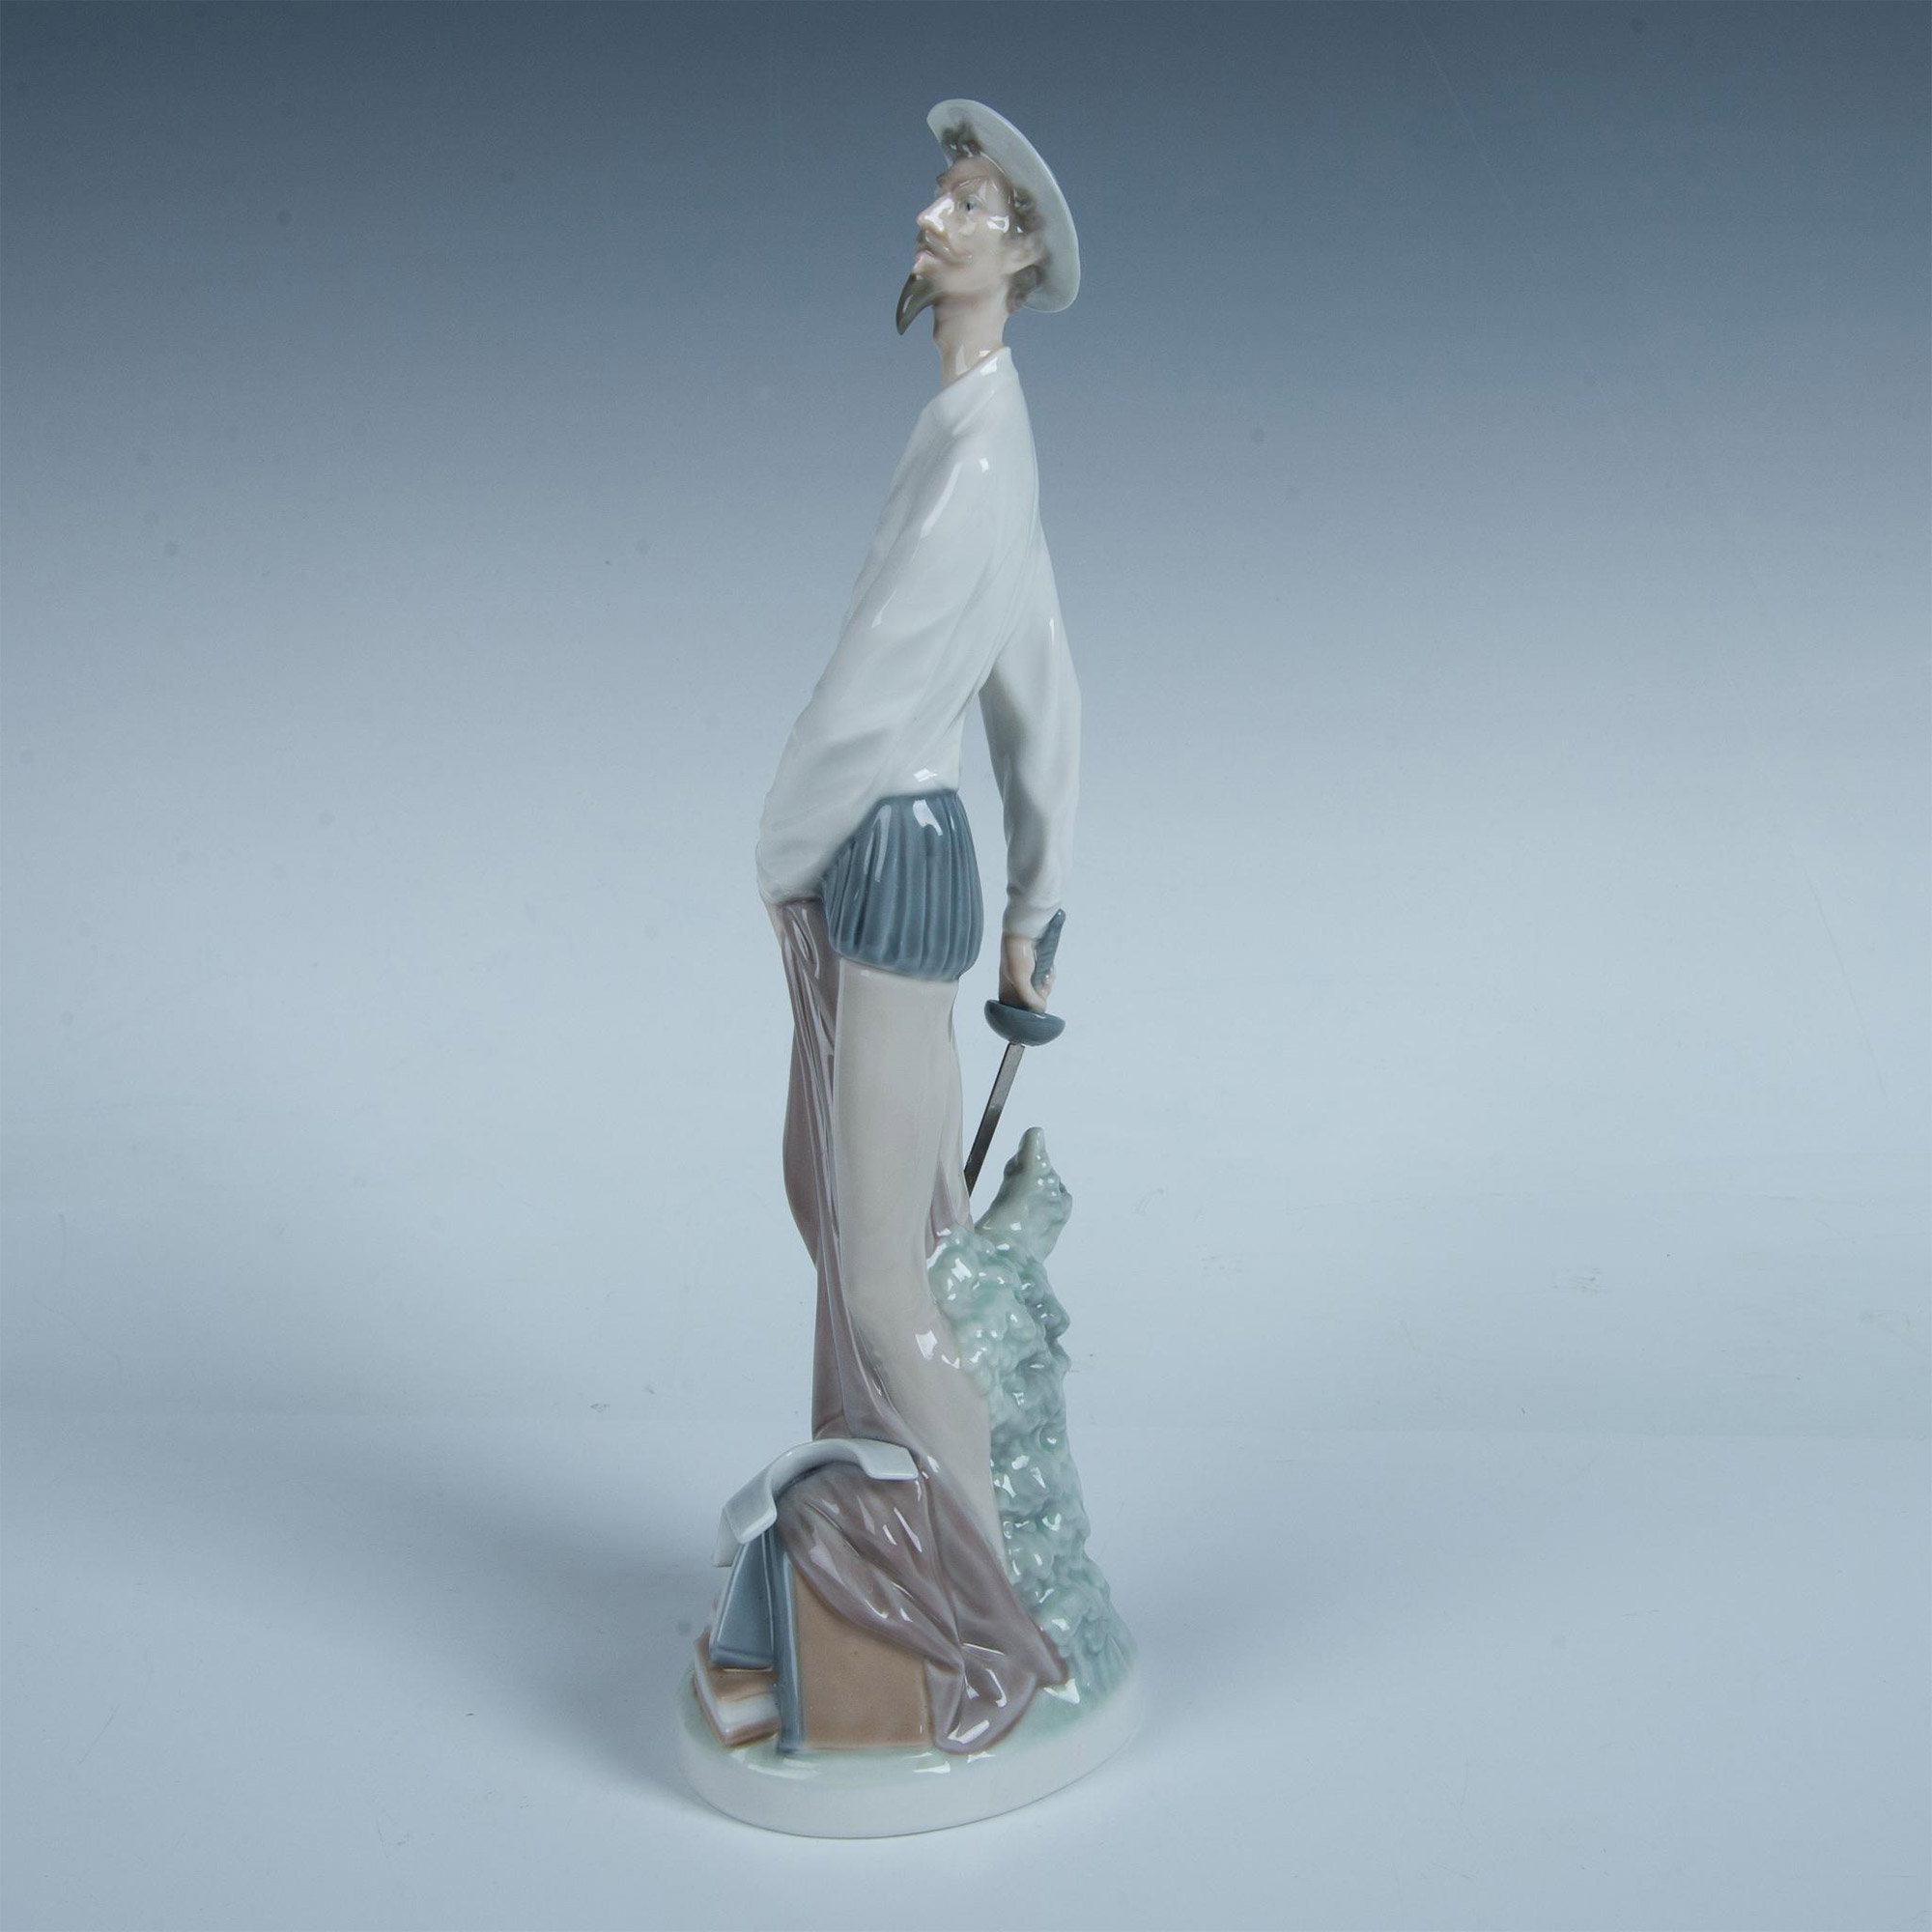 Don Quixote Standing Up 1004854 - Lladro Porcelain Figurine - Image 4 of 7